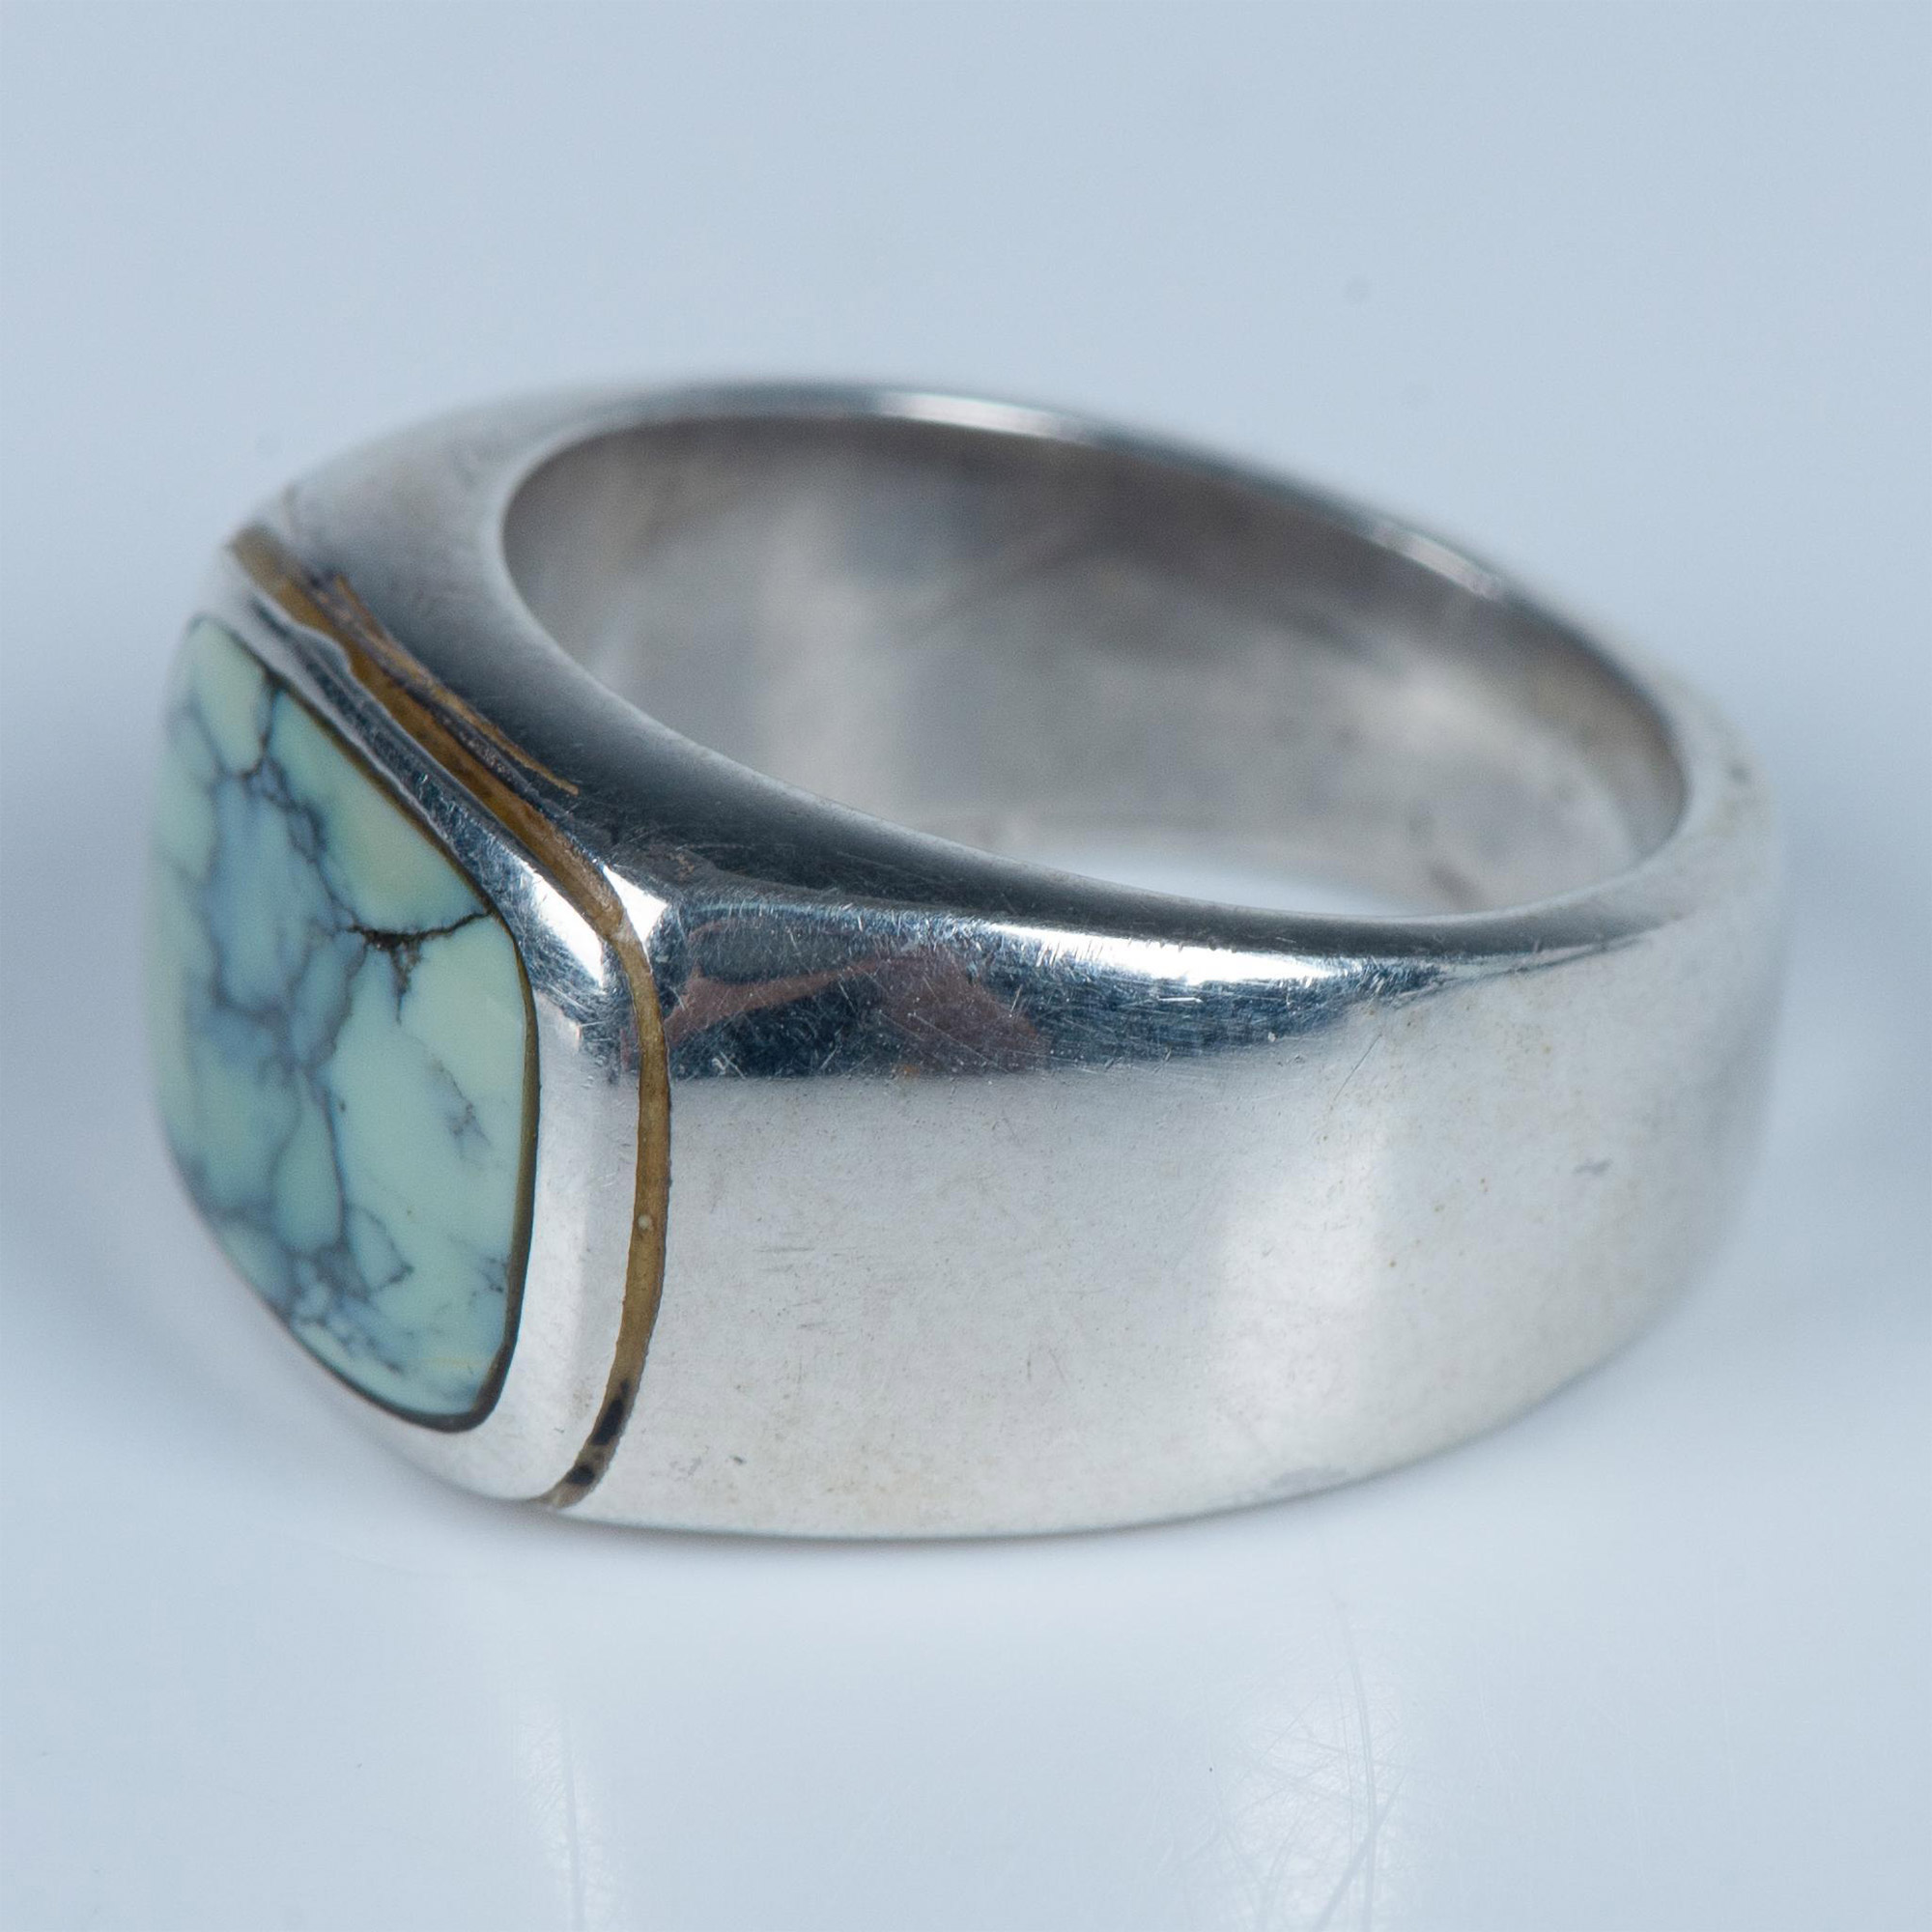 Unique Sterling Silver & Turquoise Flat Band Ring - Image 2 of 6